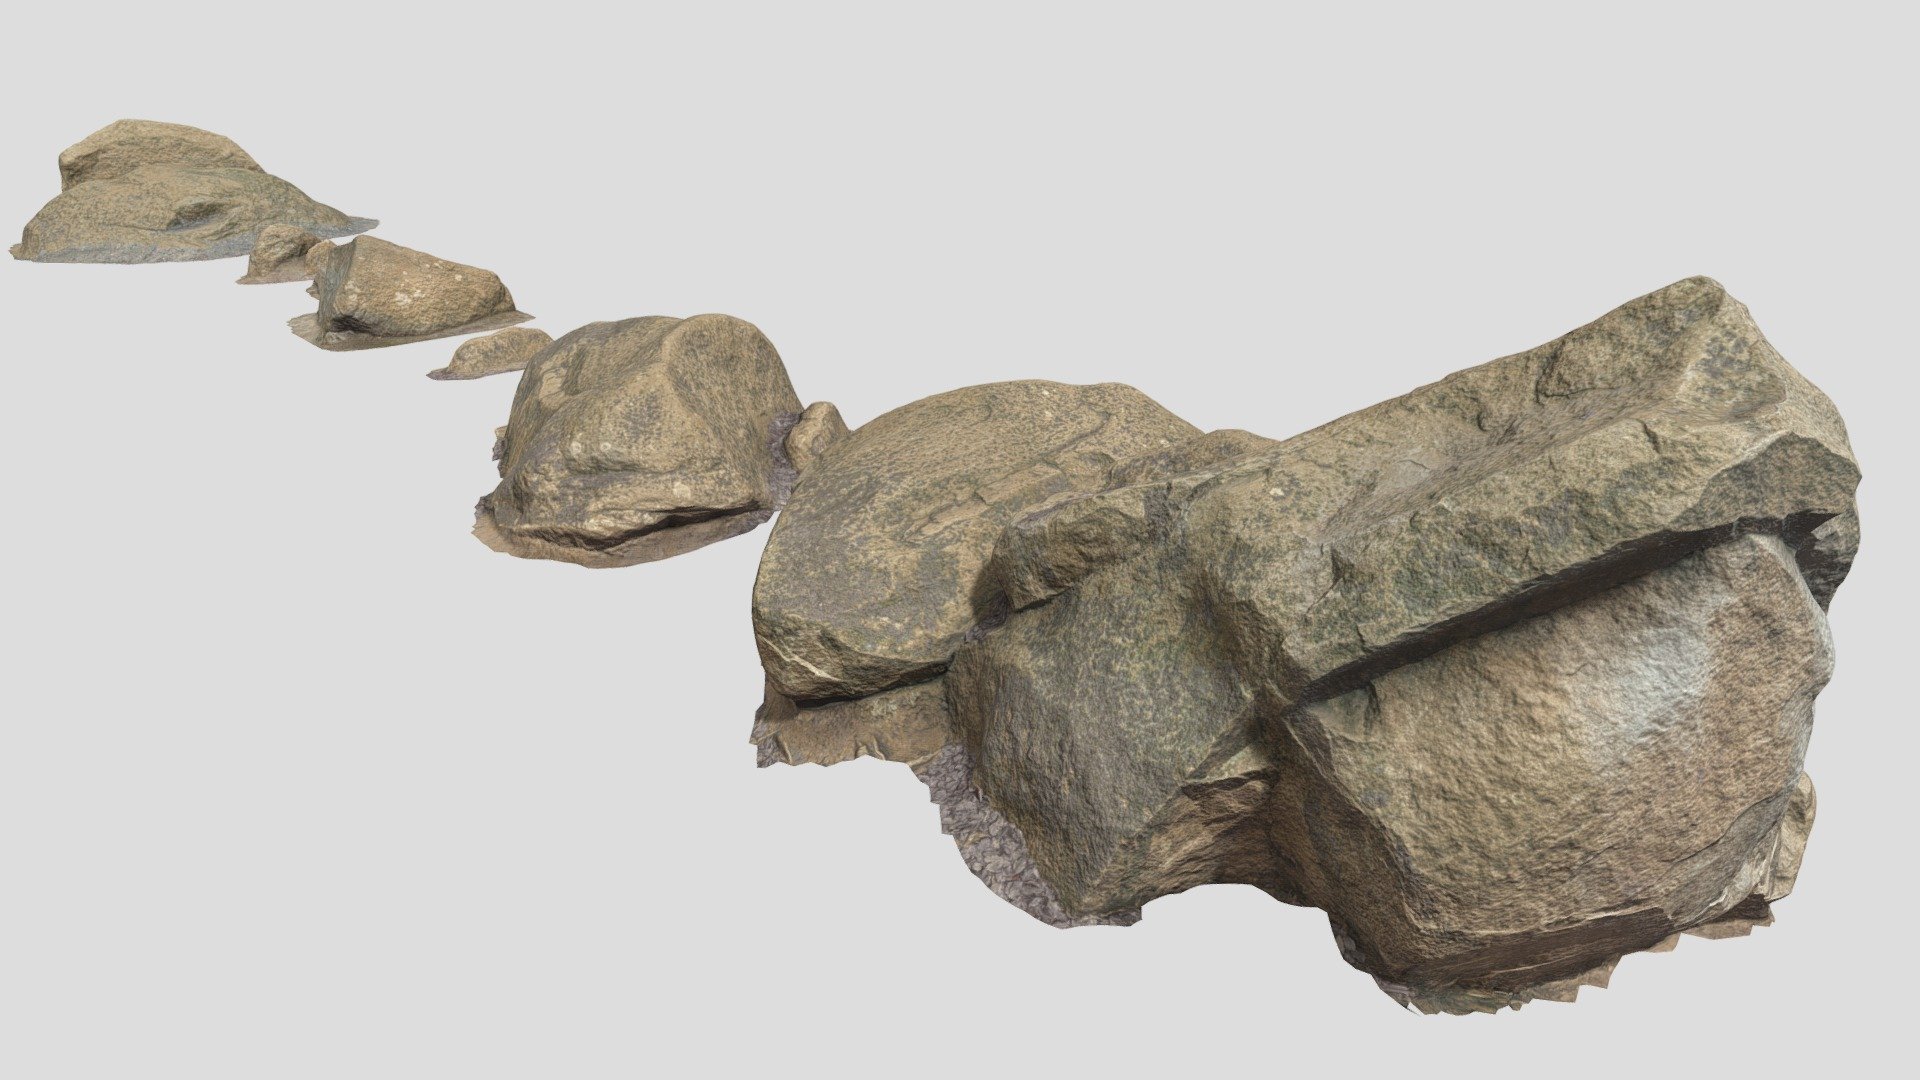 3x 4K Texture sets

Fully processed 3D scans: no light information, color-matched, etc.

Ready to use for all kind of CGI

Source Contains:
- .obj
- .fbx
- .blend

4K Textures:
- normal map
- albedo
- roughness

Please let me know if something isn't working as it should.

Realistic Rock Stone Moss Scans - 3D Low Poly Models - Rock stone boulder Scans - 3D Low Poly Pack - Buy Royalty Free 3D model by Per's Scan Collection (@perz_scans) 3d model